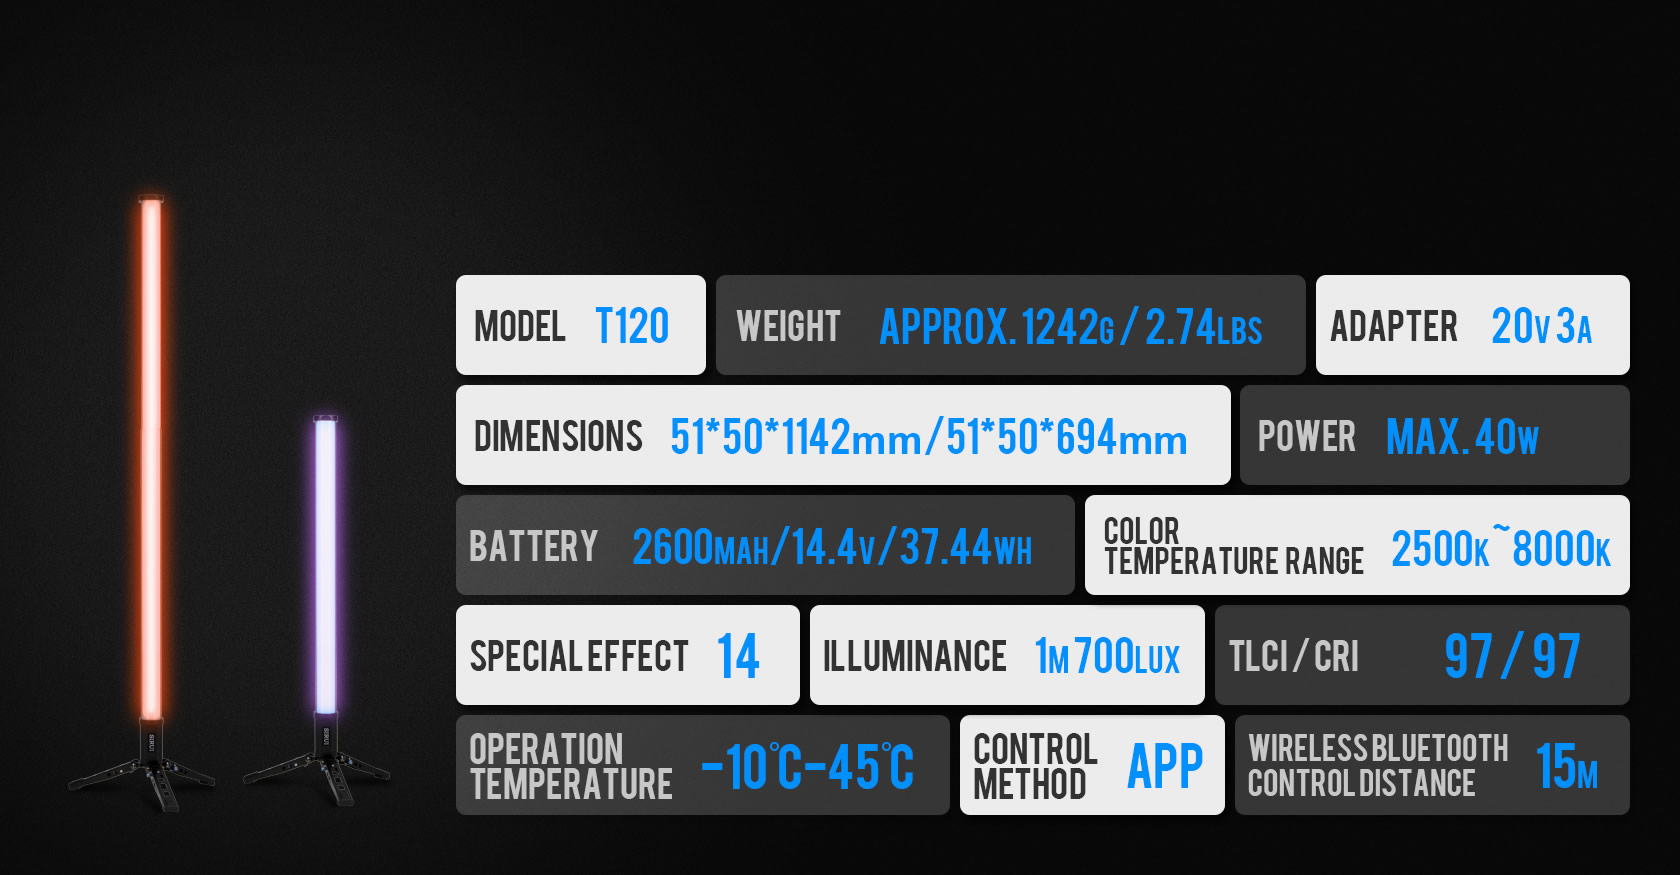 T120 Specifications